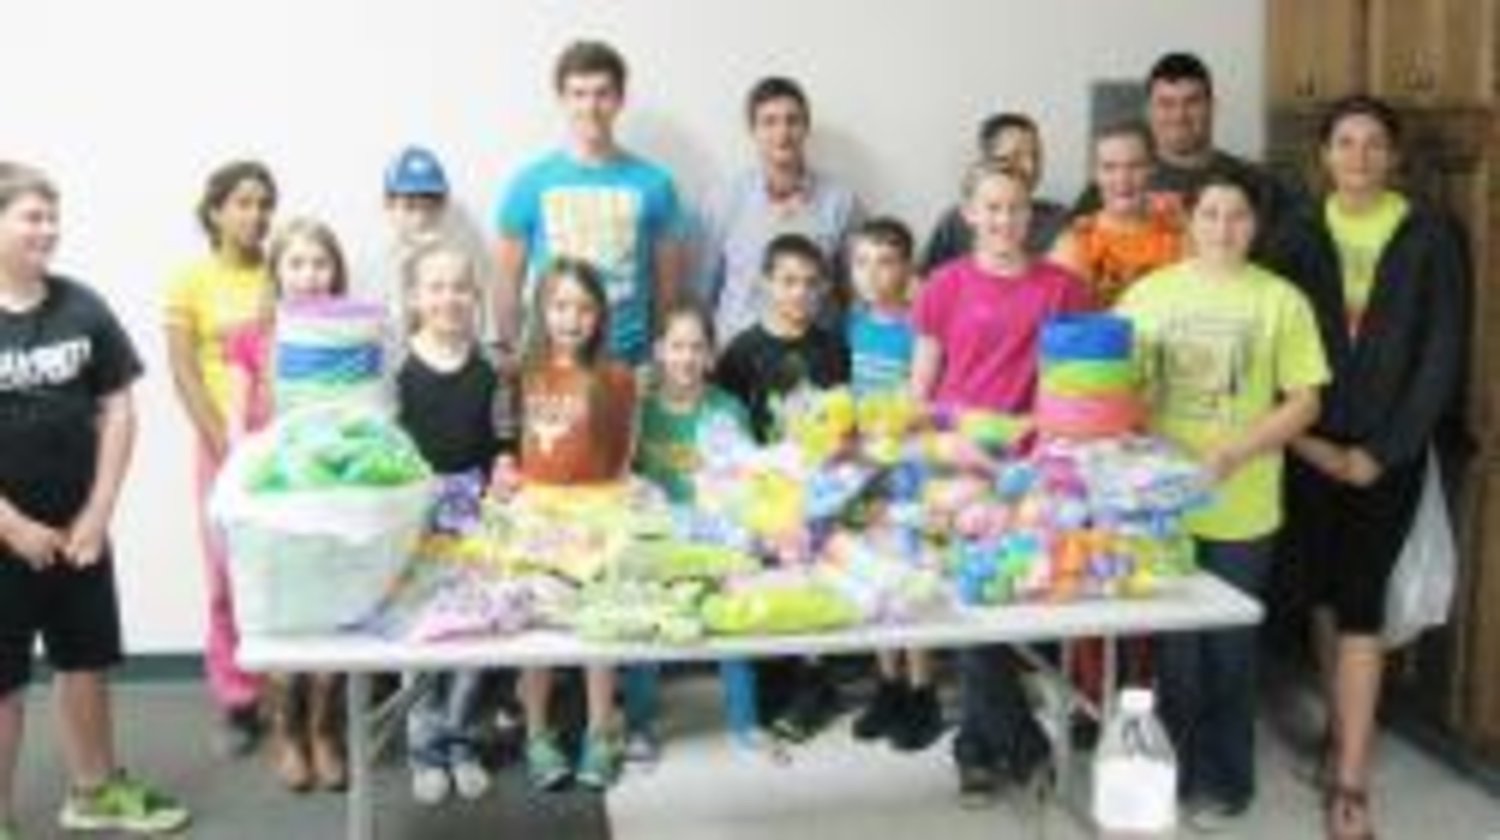 Pictured are members of the Quitman 4-H Club as they continue their community service tradition of filling Easter baskets and providing these for the Wood County Special Education classes. The Quitman 4-H Club will host an Easter Egg Hunt for these students on Thursday, April 17th. Photo courtesy of the Wood County Extension Office.